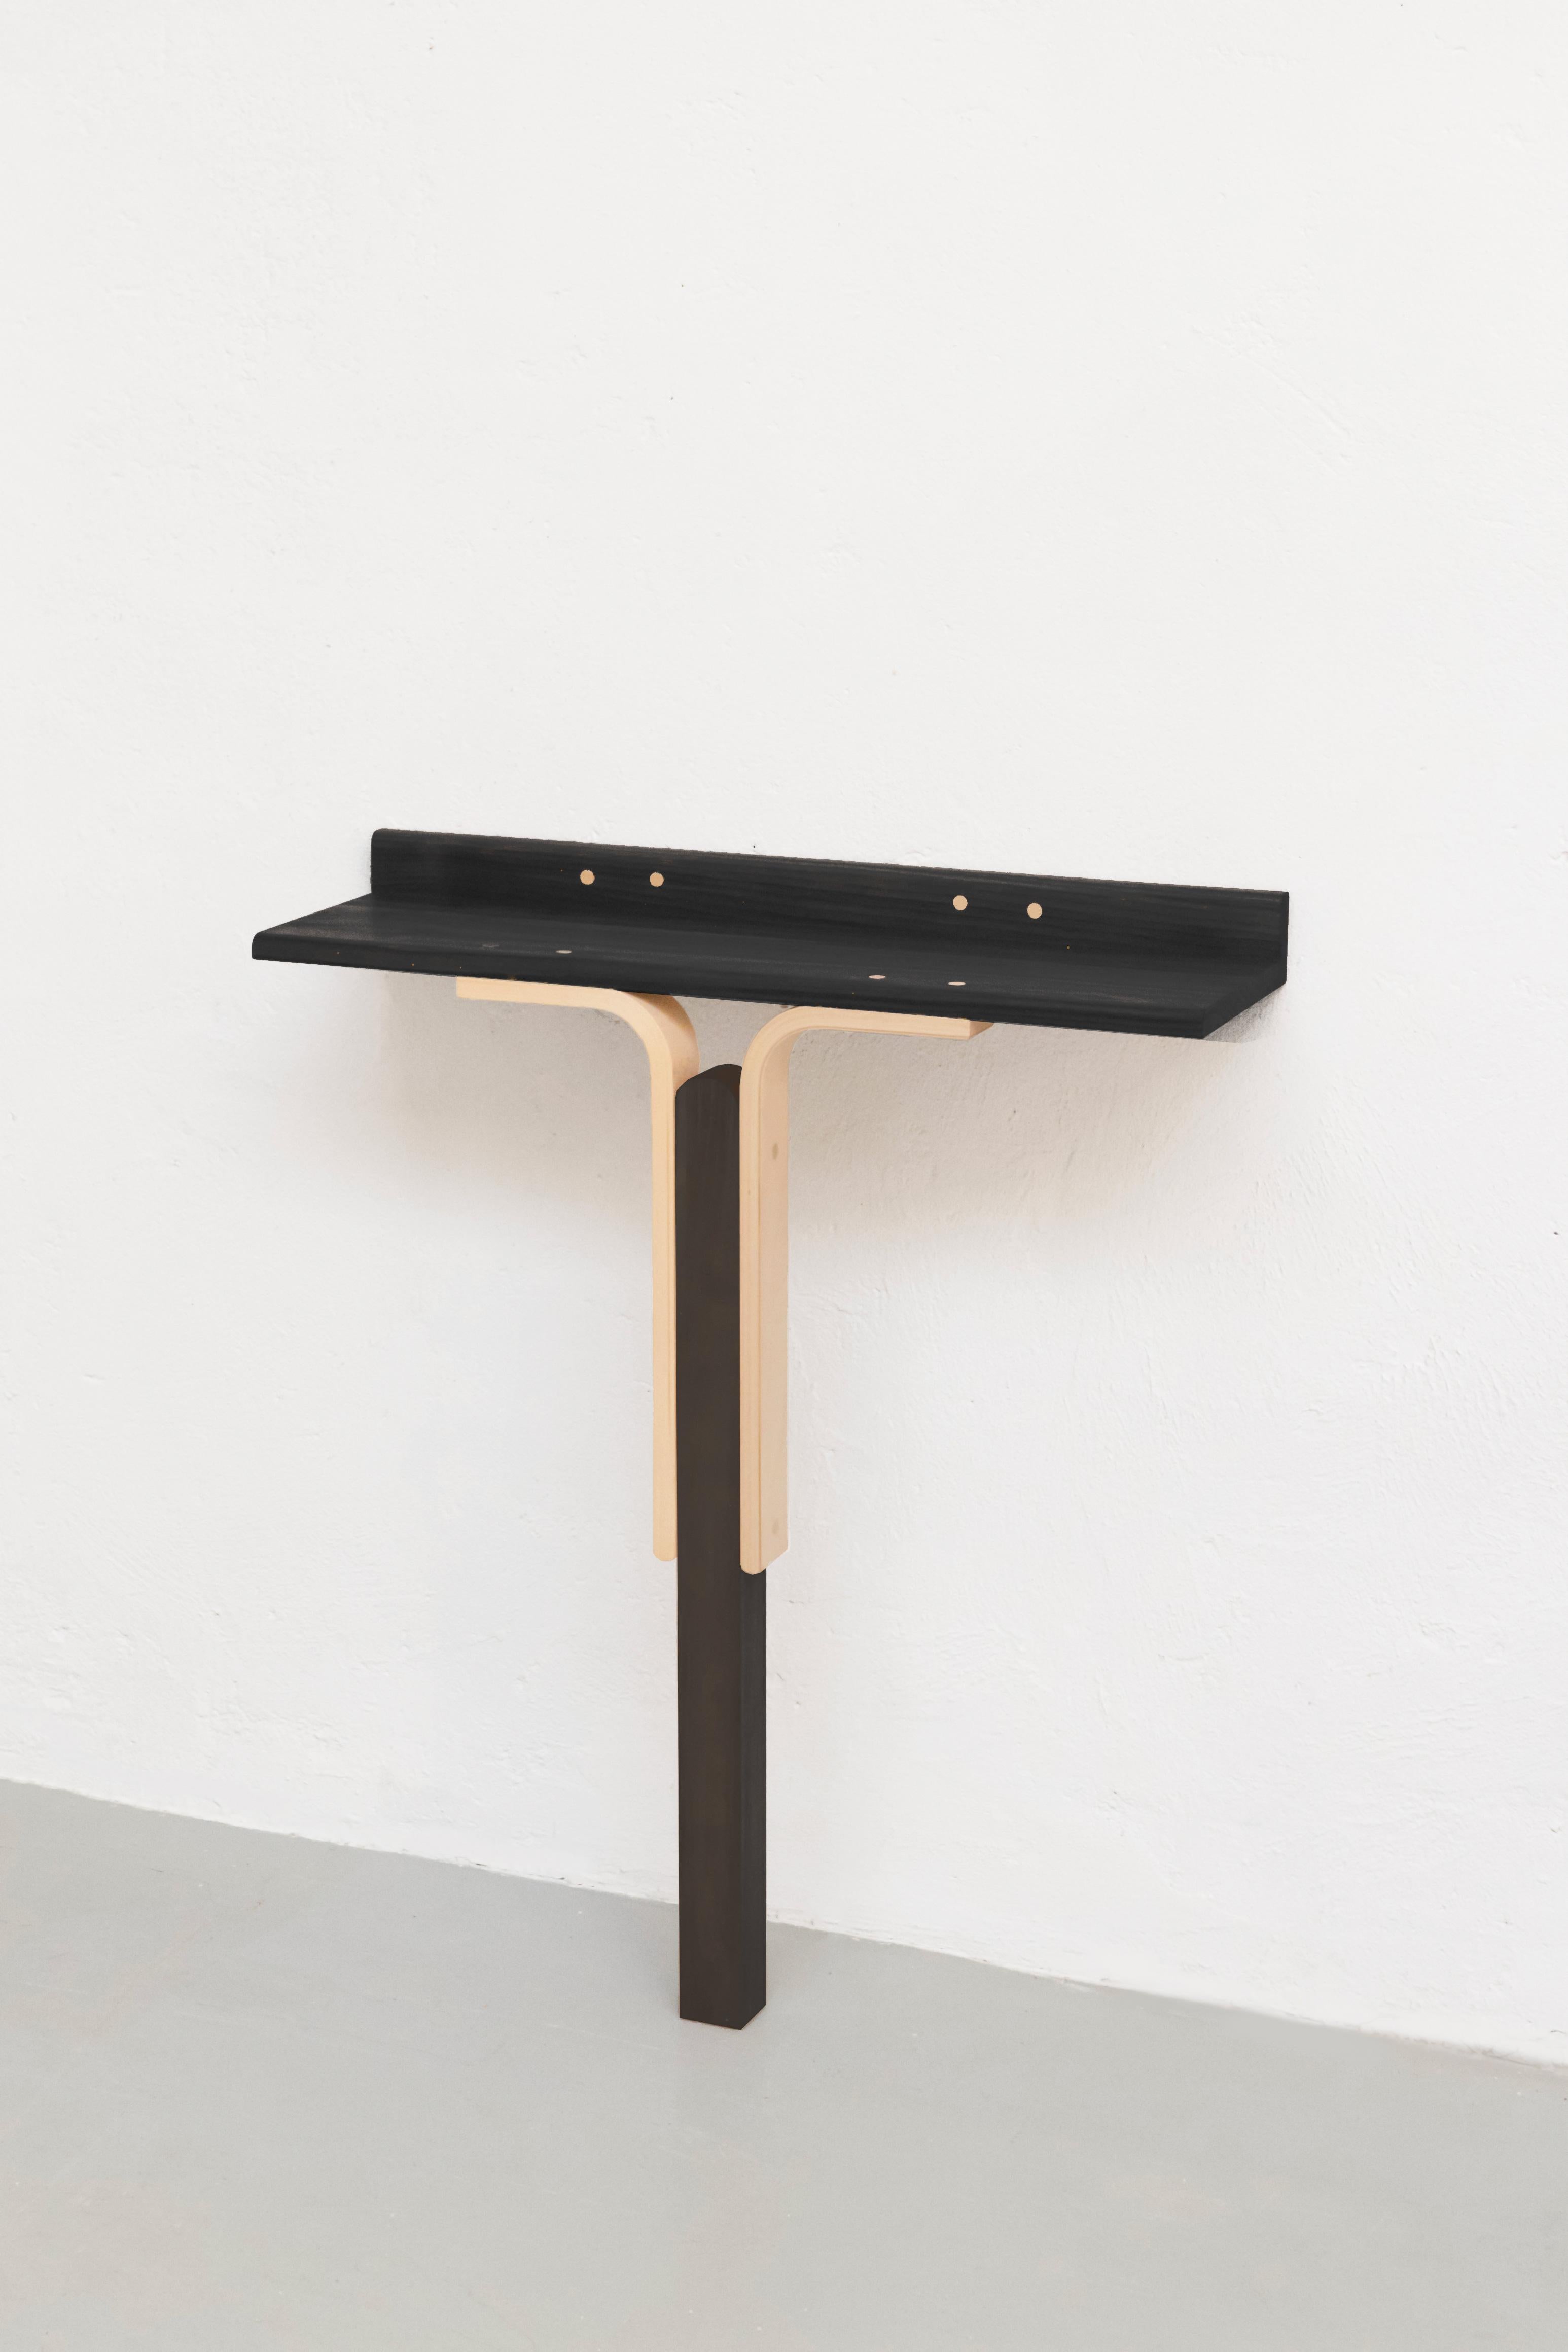 Art Deco 21st Century, Contemporary Wood Console Table Handmade in Italy by Ilaria Bianchi For Sale